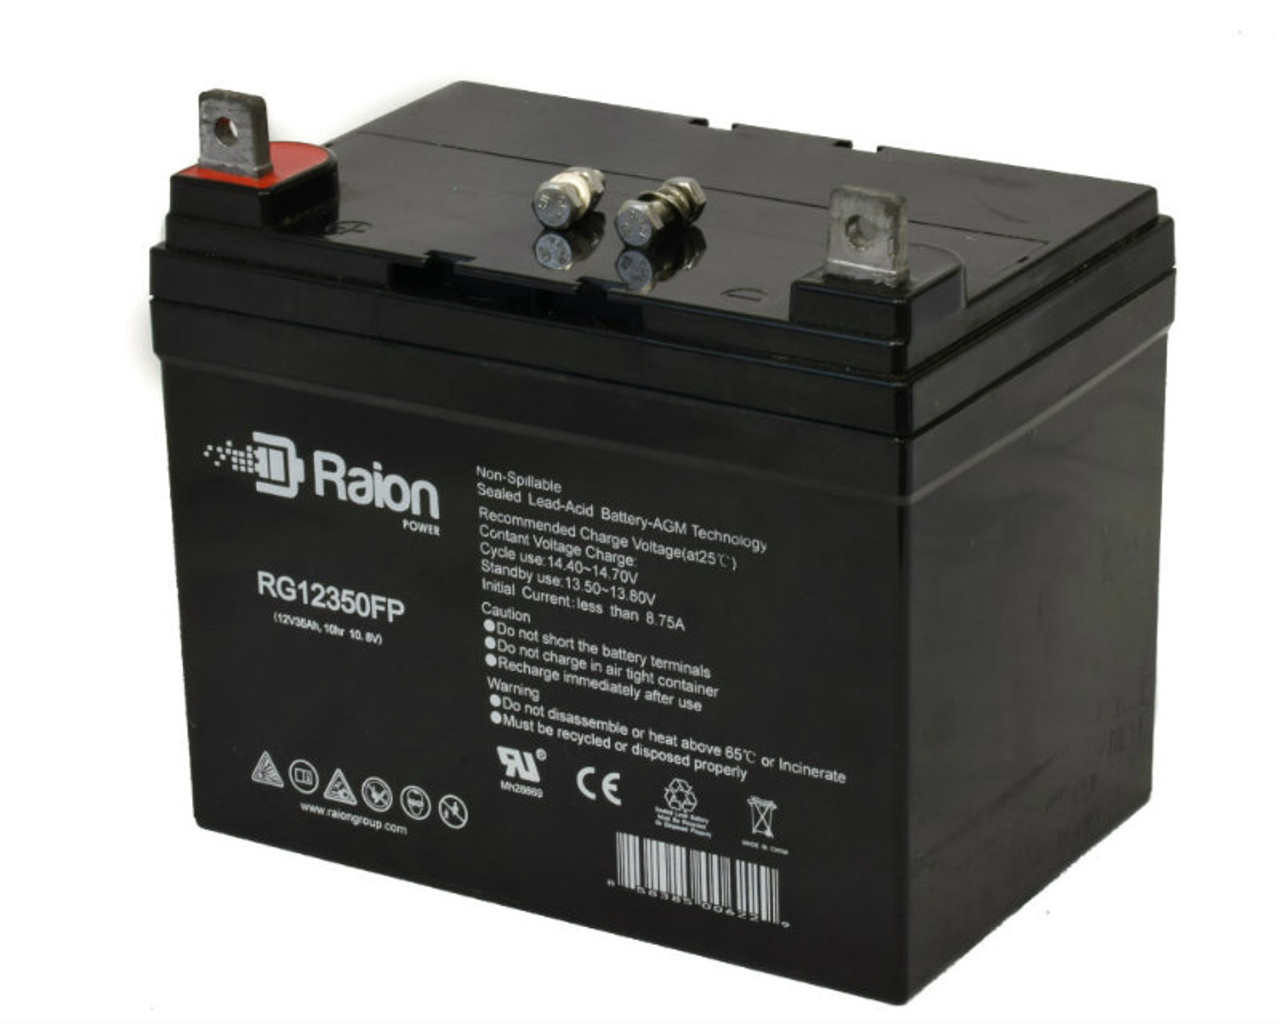 Raion Power Replacement 12V 35Ah Battery for Union MX-12340 - 1 Pack